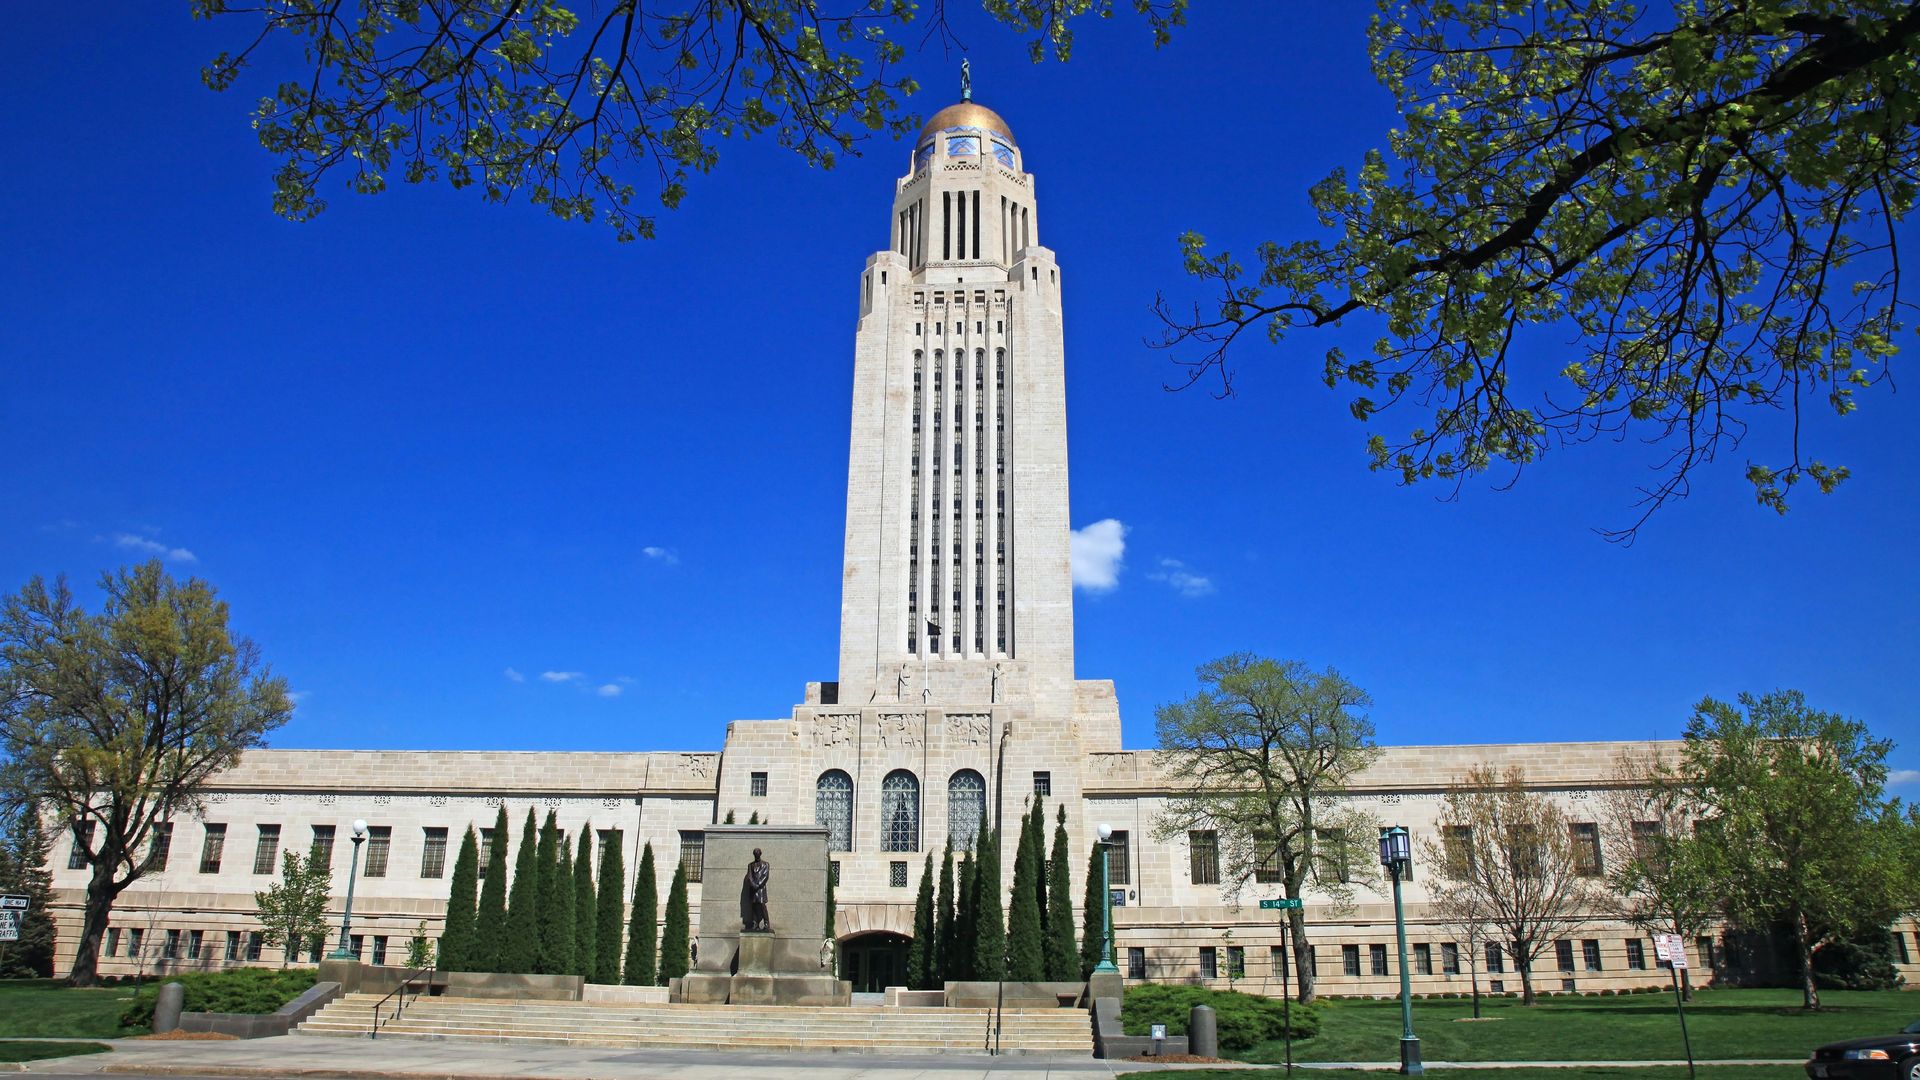 Picture of the Nebraska state Capitol